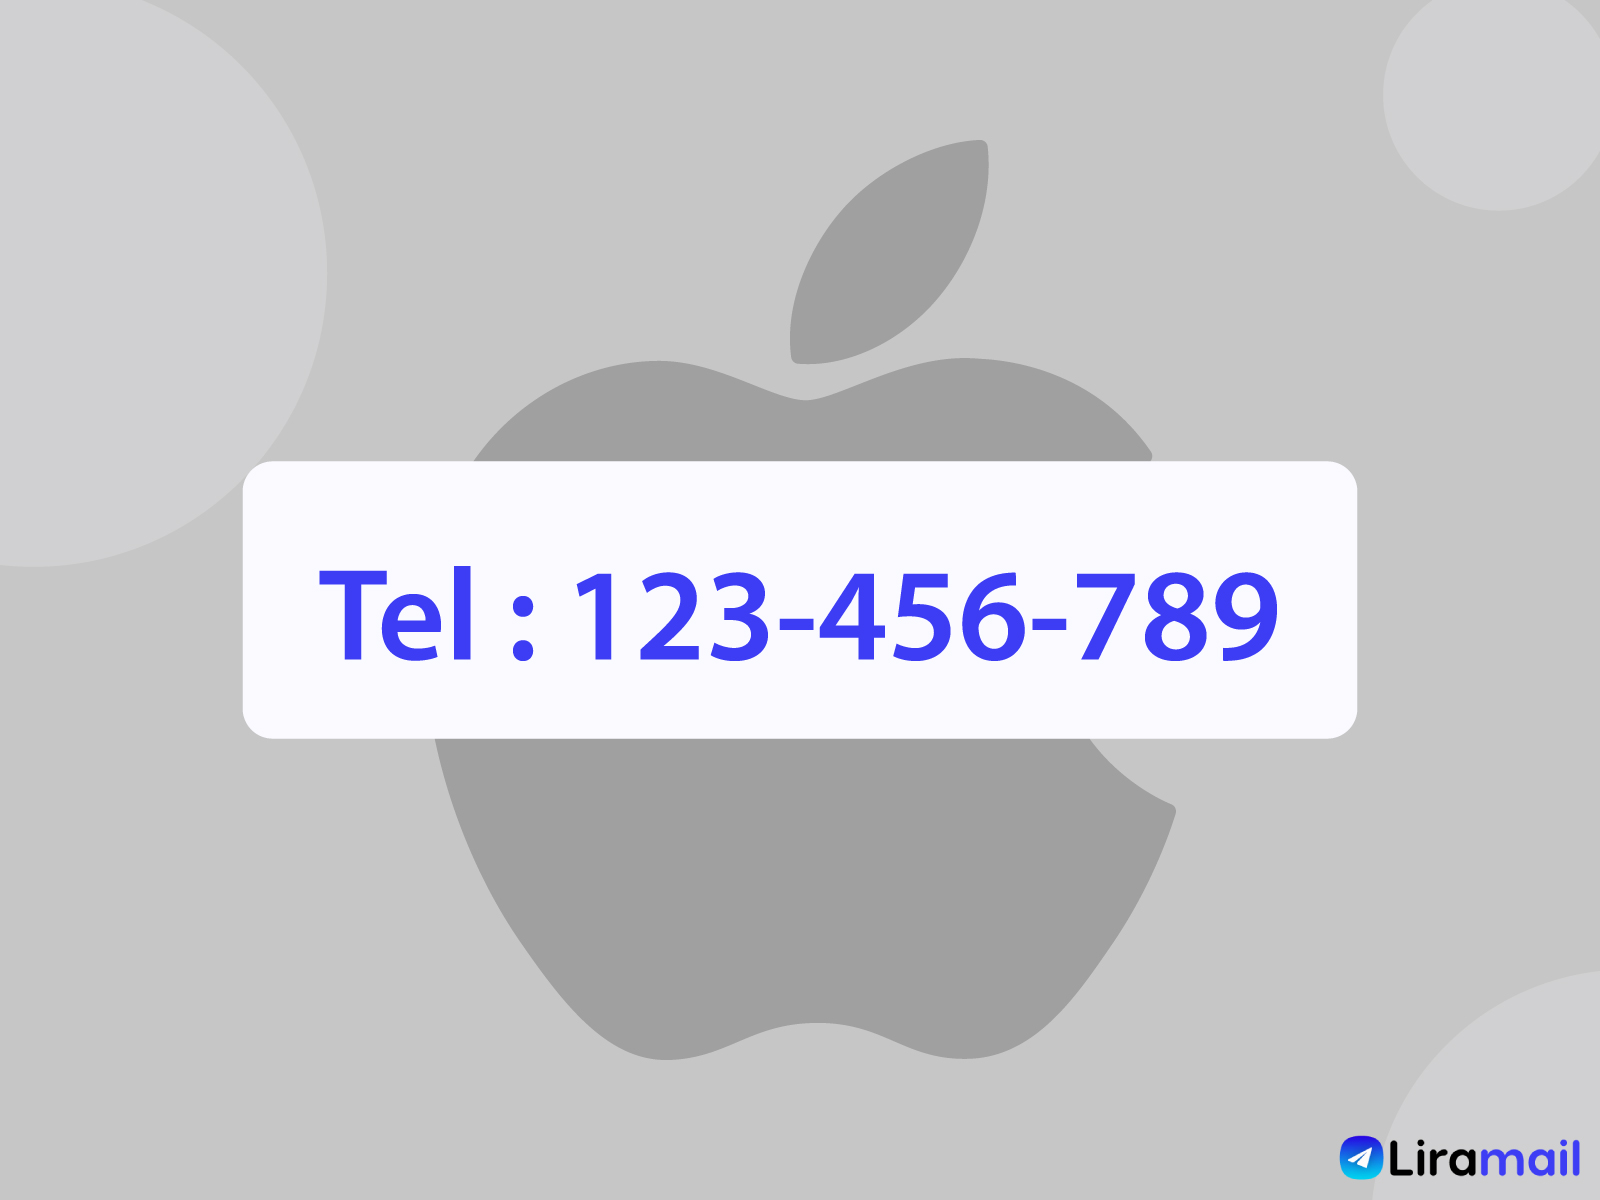 4 ways to fix iPhone numbers converted into blue links in the email? 2